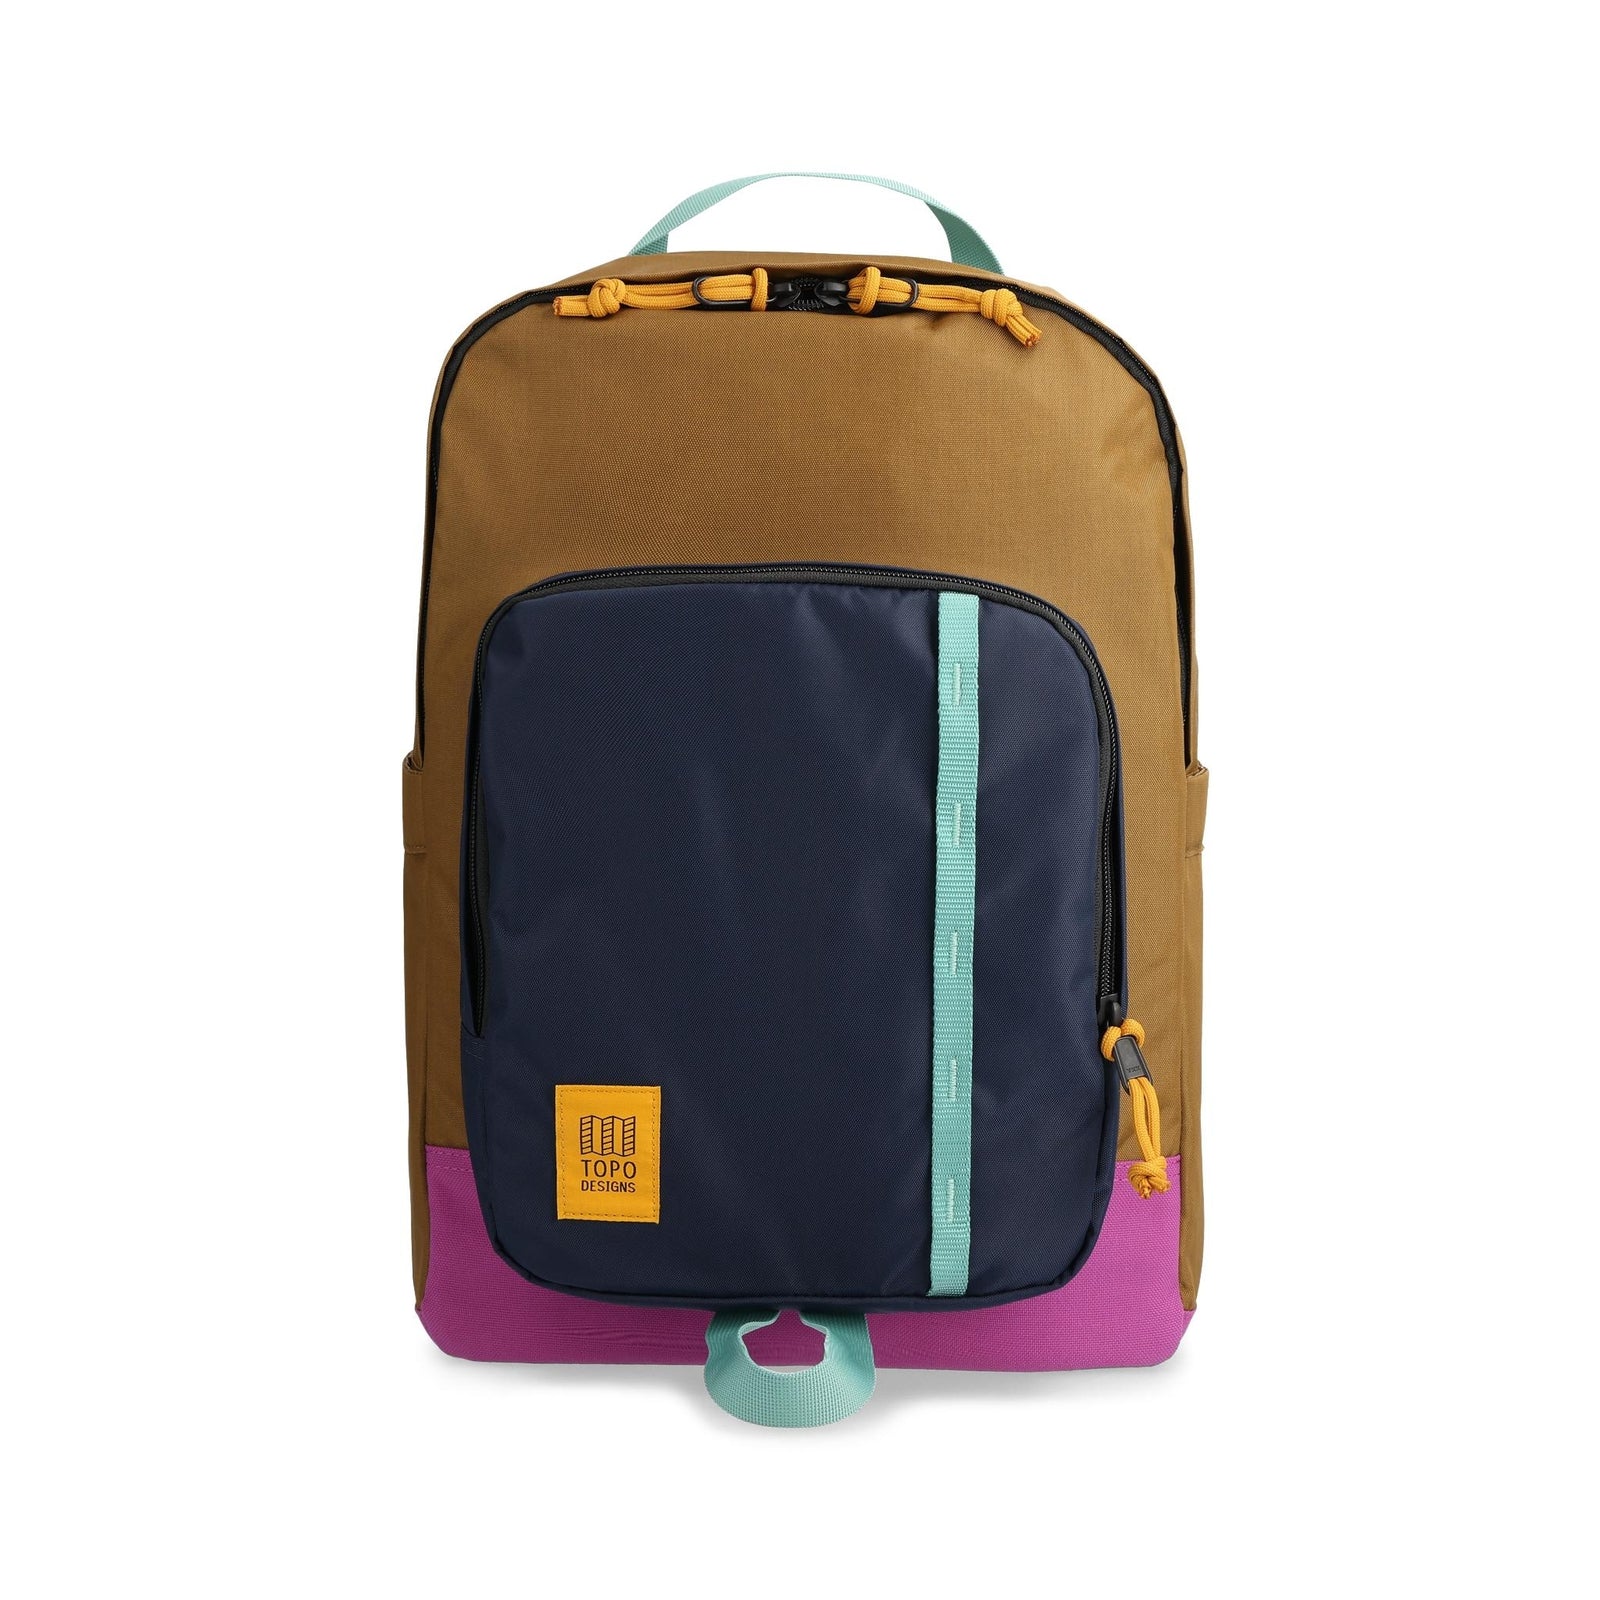 Front View of Topo Designs Session Pack in "Dark Khaki / Navy"